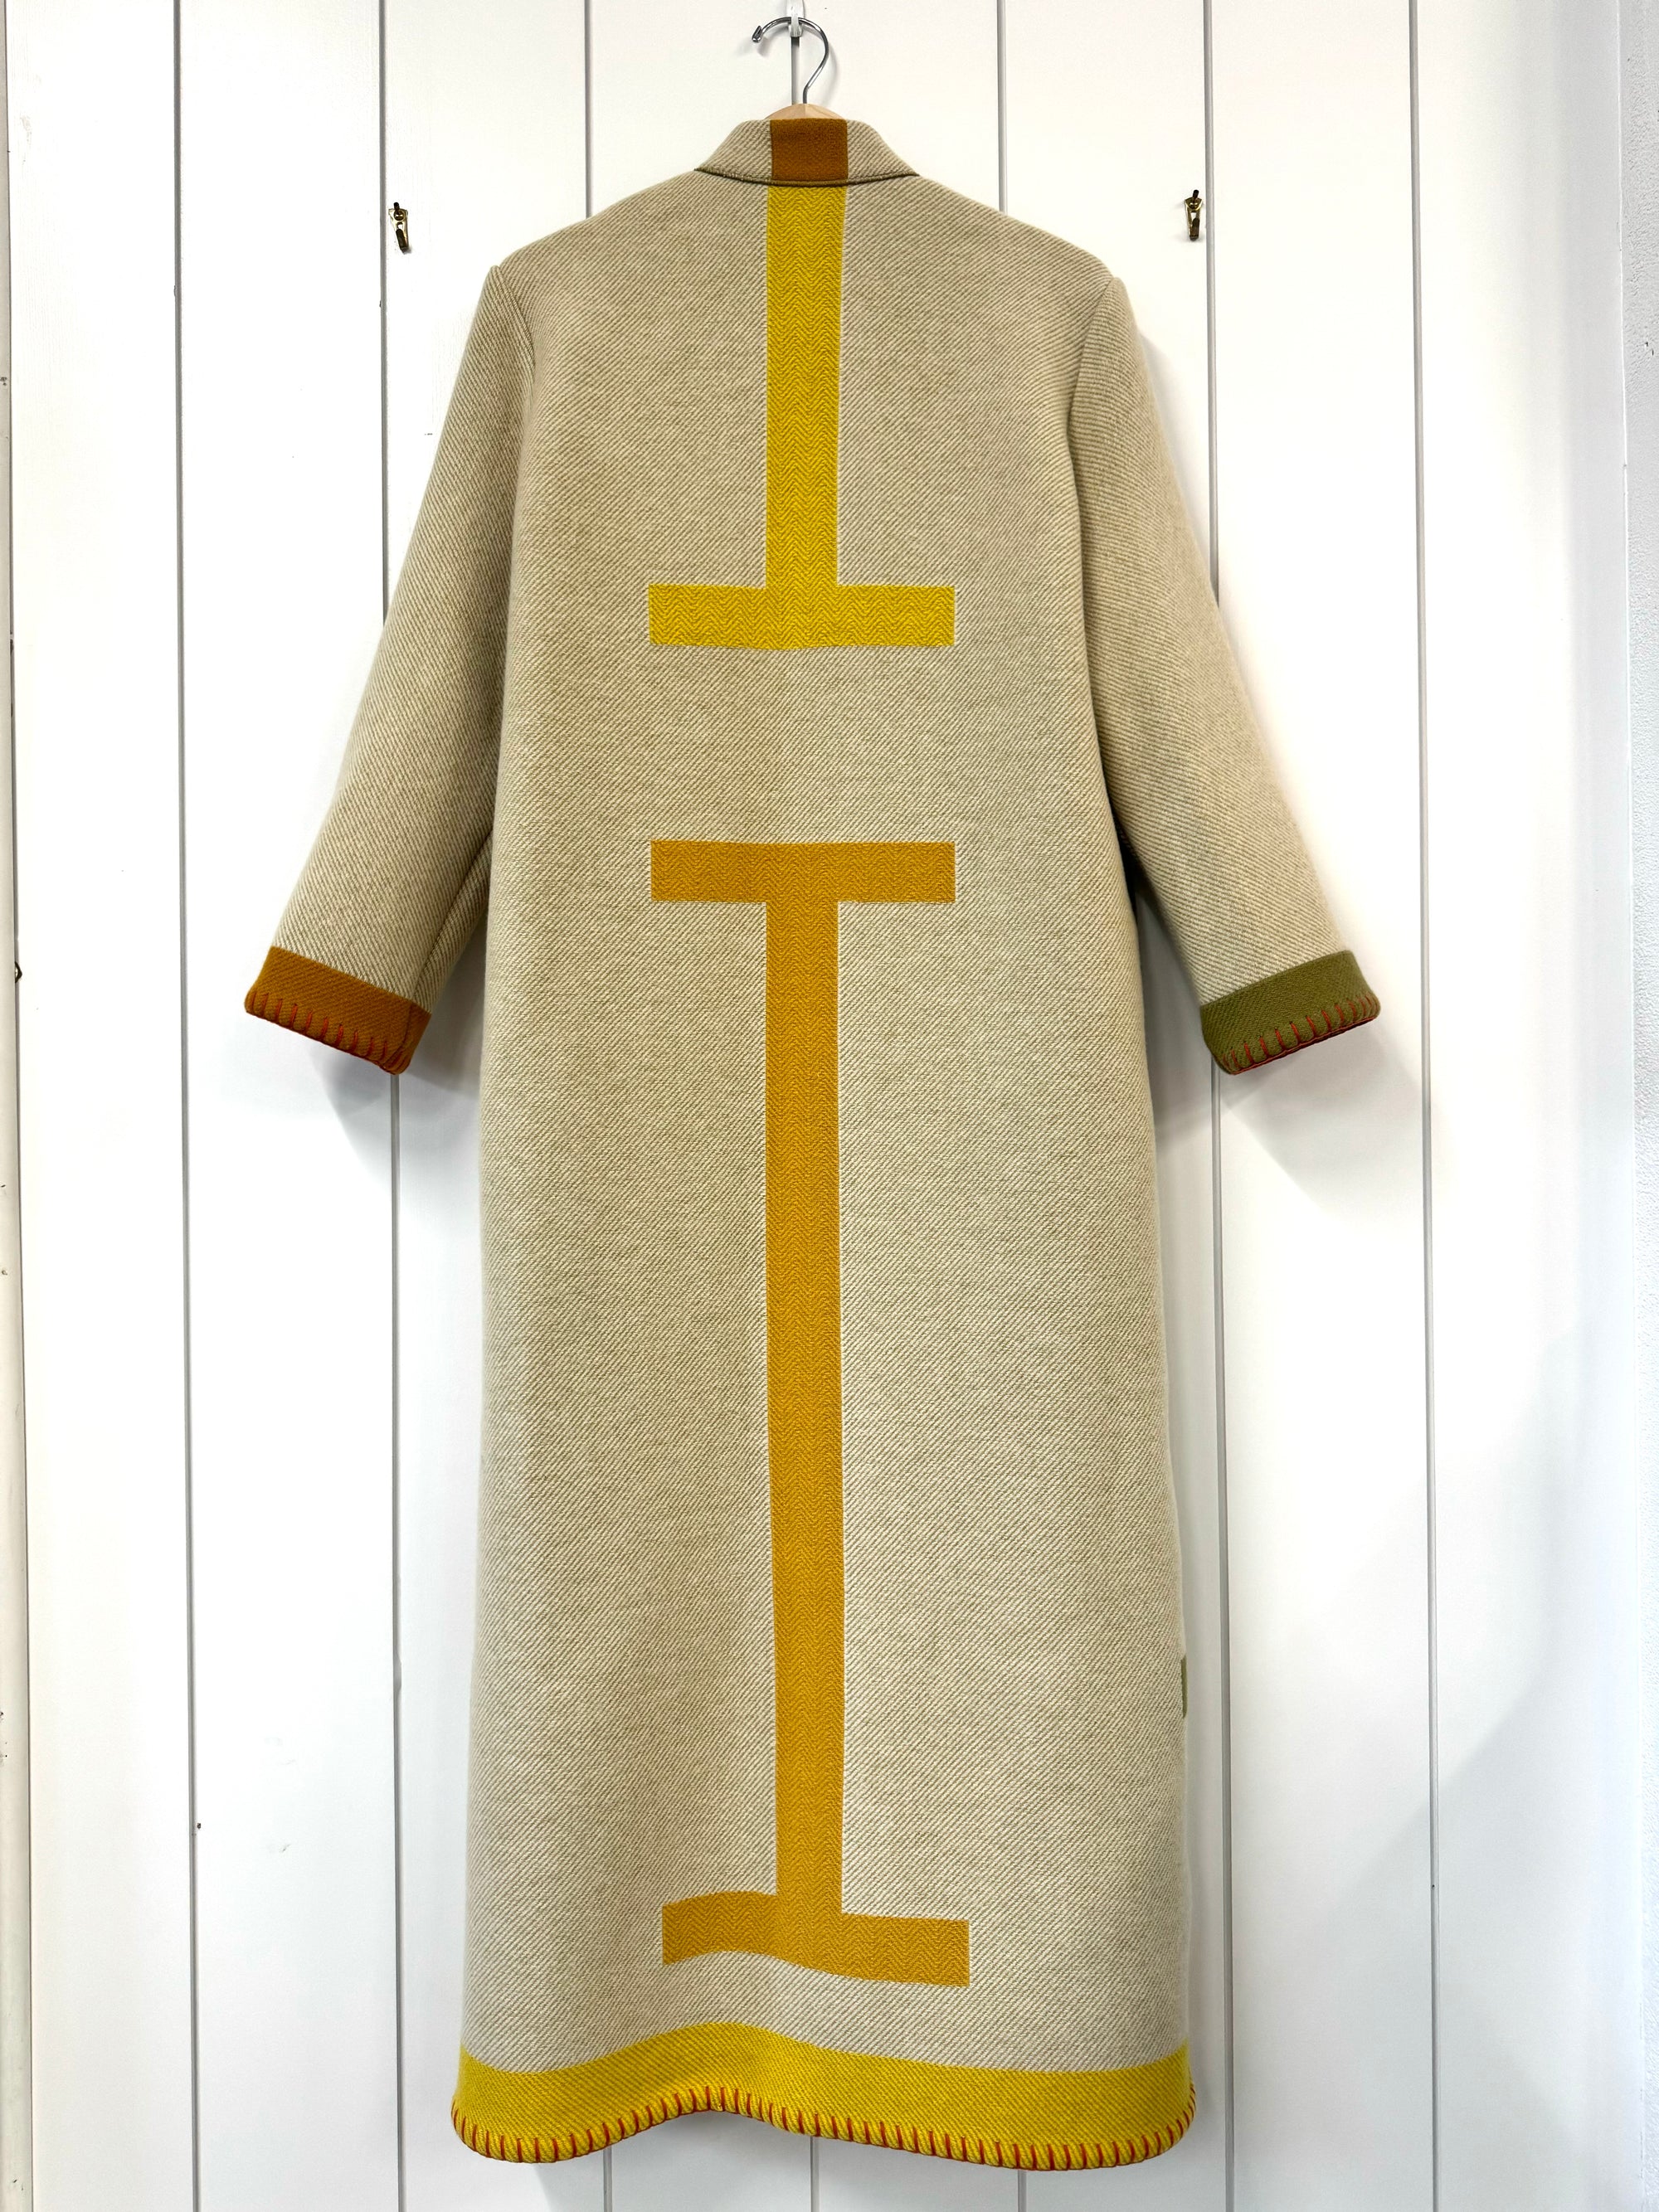 The Yellow Linear Coat